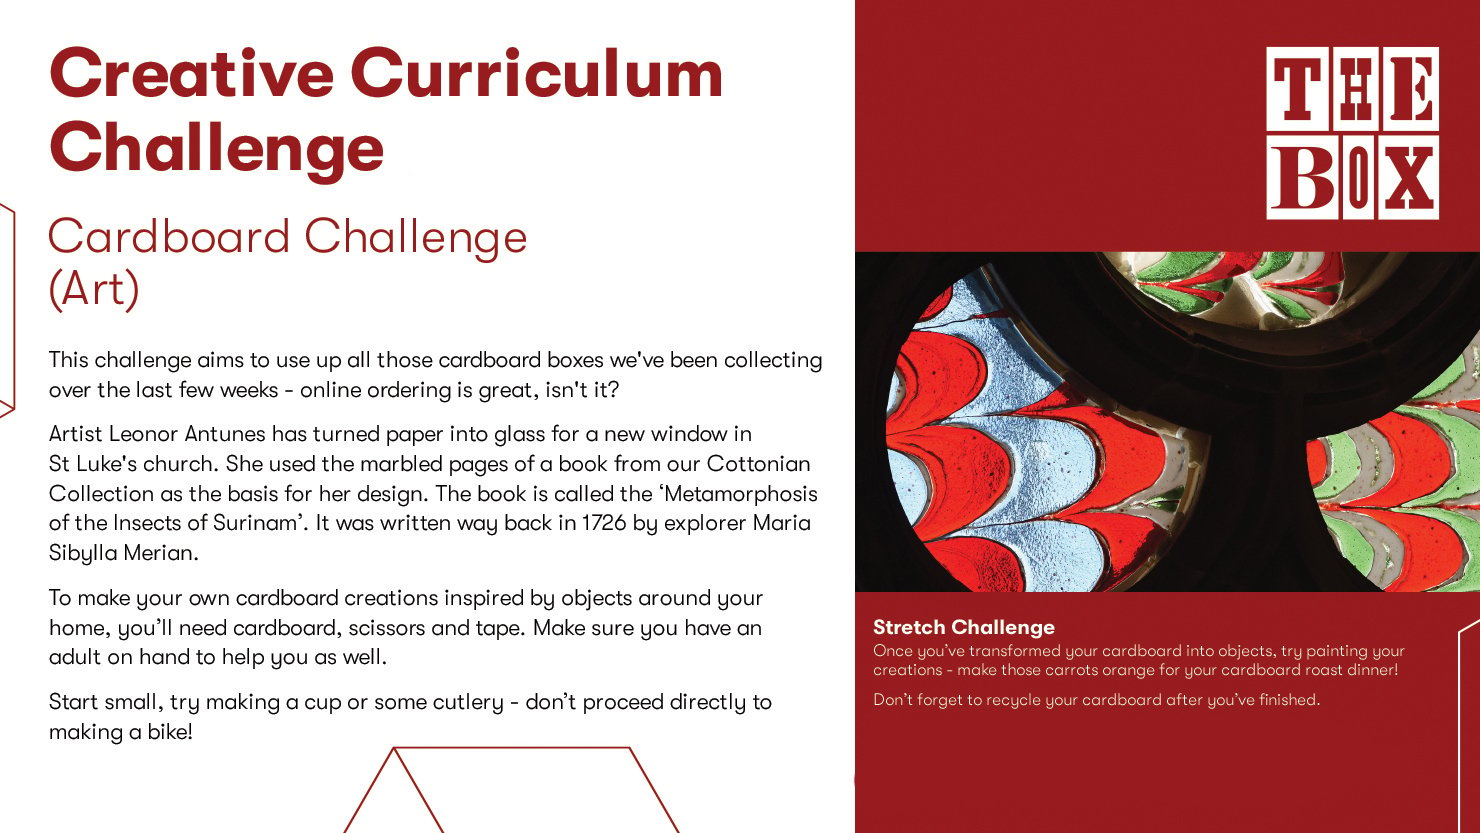 Graphic for The Box's cardboard curriculum challenge